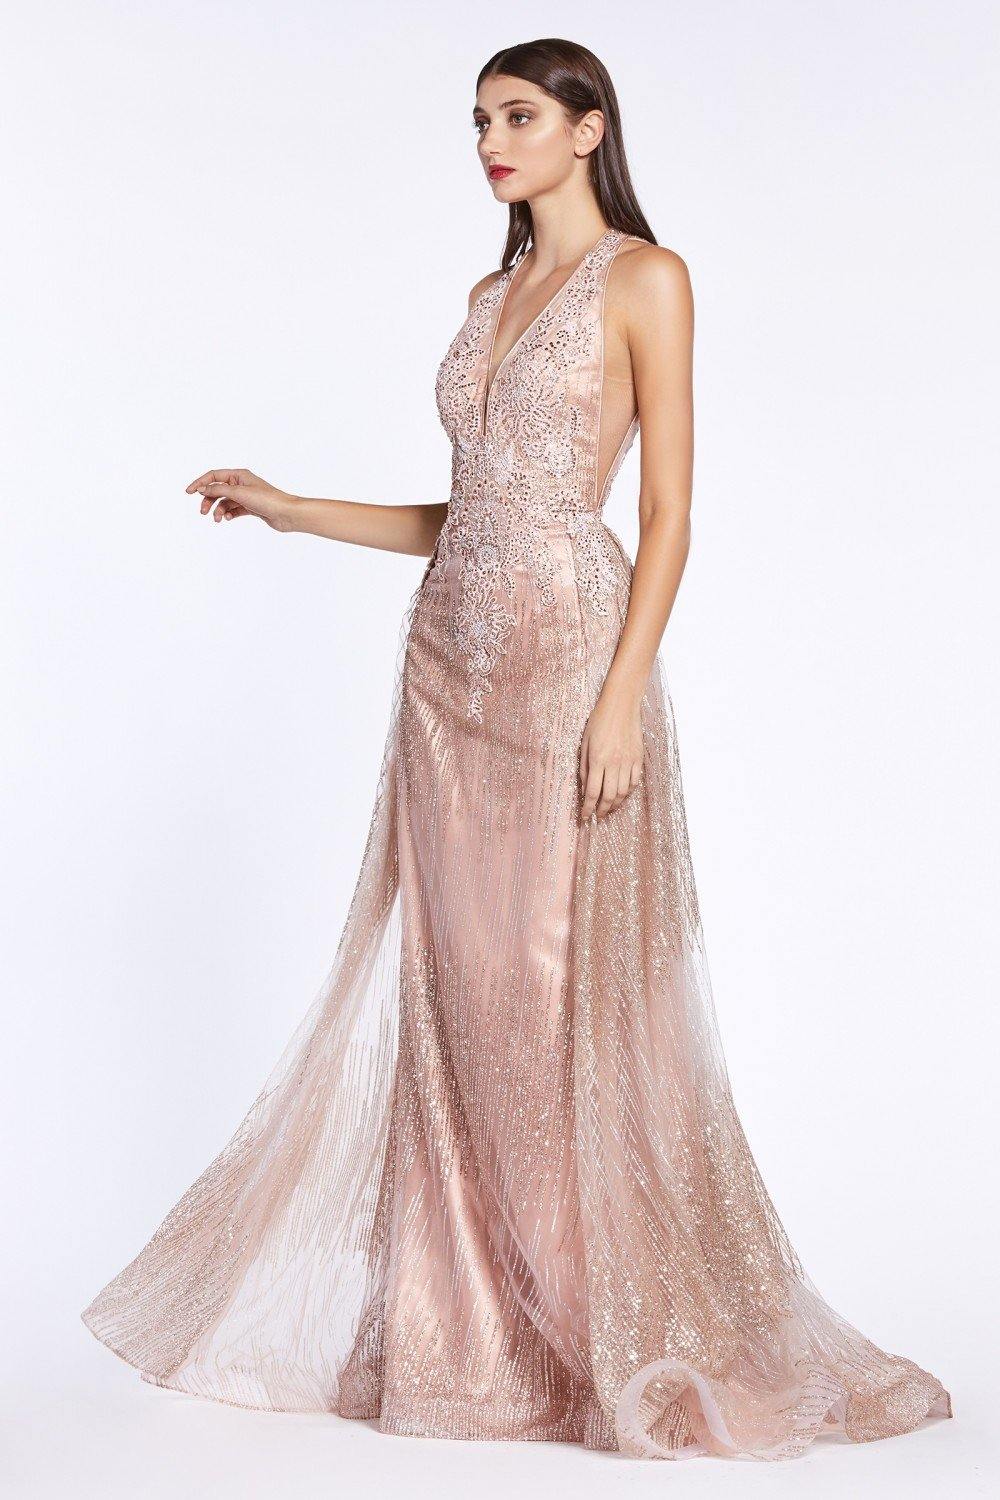 Sexy Sleeveless Long Prom Dress Evening Gown - The Dress Outlet Cinderella Divine